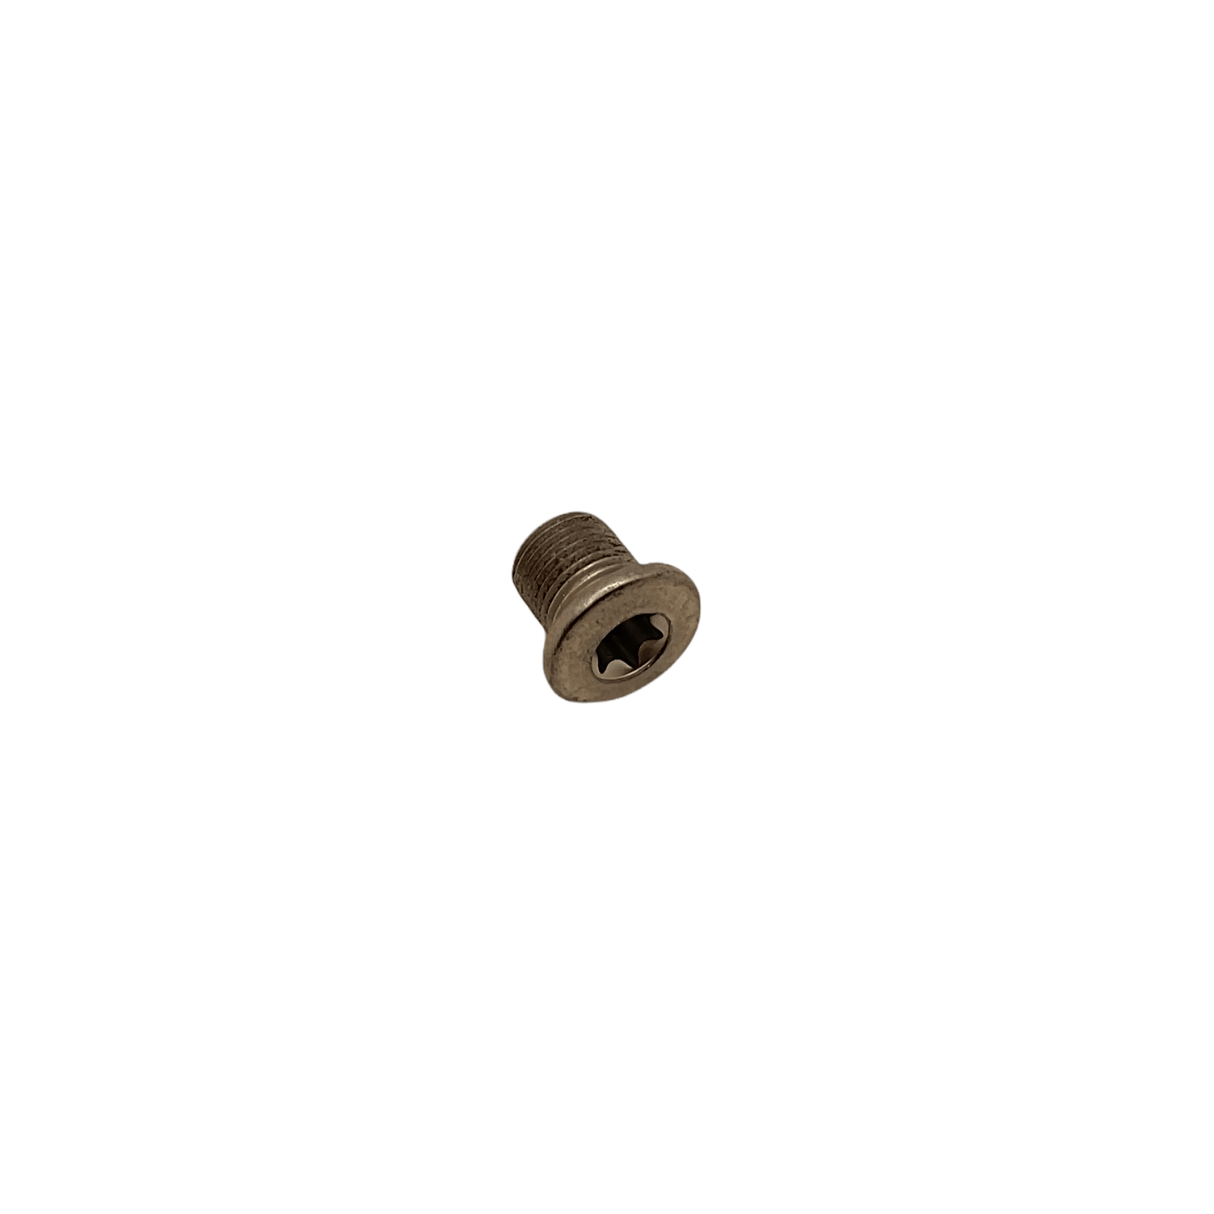 Shimano Spares FC-M670 42-32T double gear fixing bolt; M8 x 8.5 mm and nut; set of 4